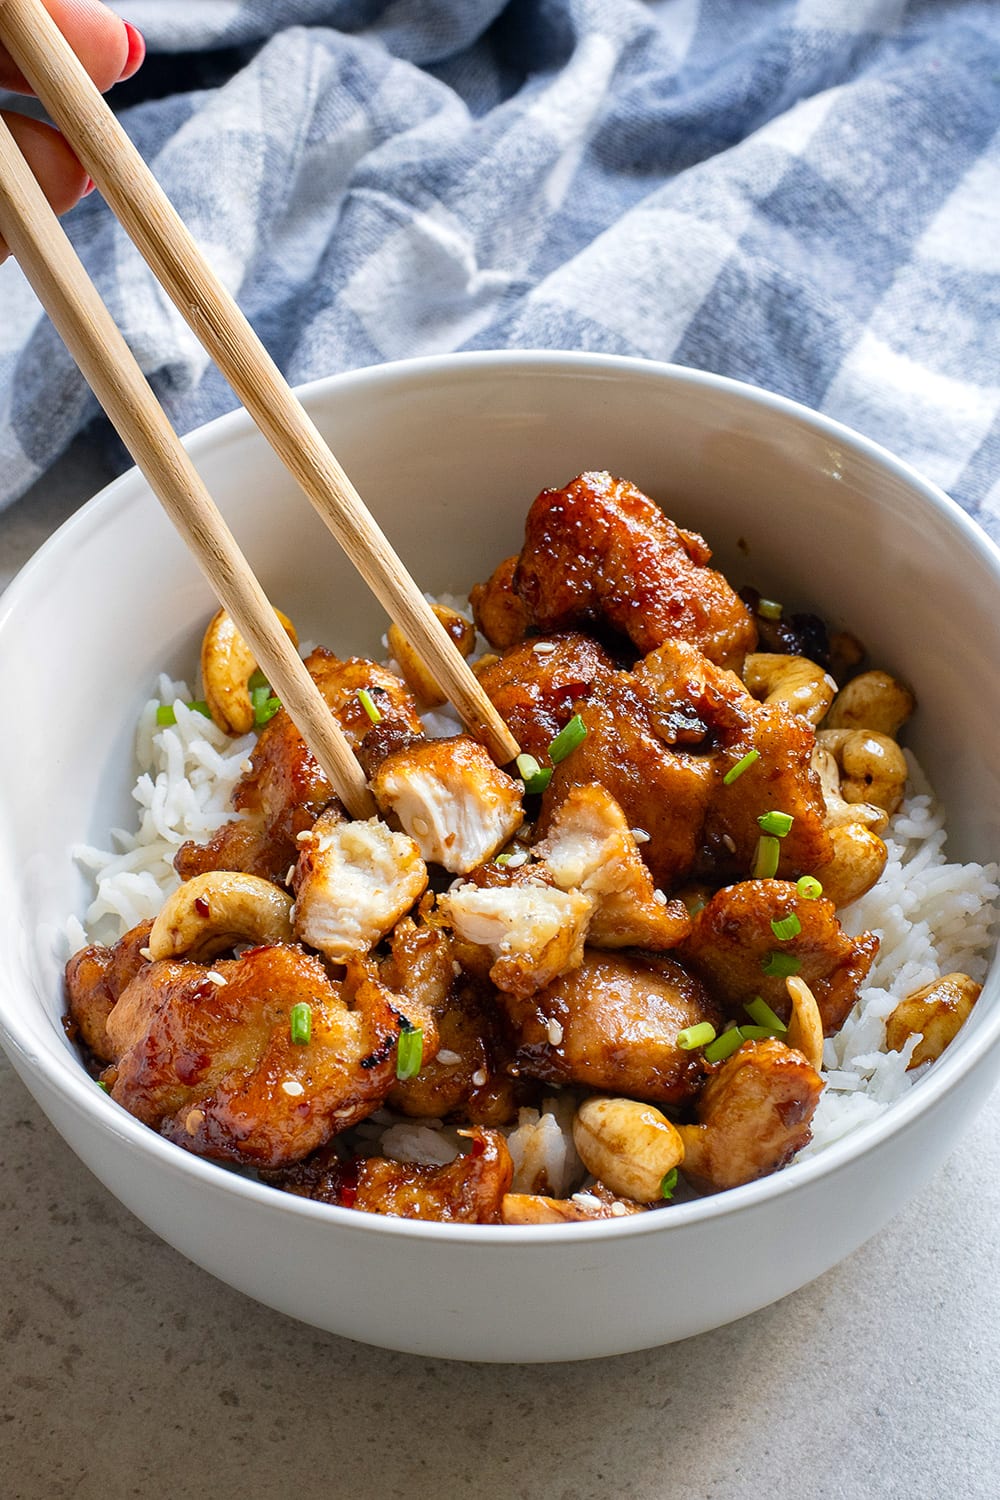 This Chinese-inspired sticky crispy honey chicken with cashew nuts is a sweet and delicious homemade takeout. Ready in 25 minutes and made with just a few ingredients, this chicken recipe is simple and quick, perfect for weekly dinners.  